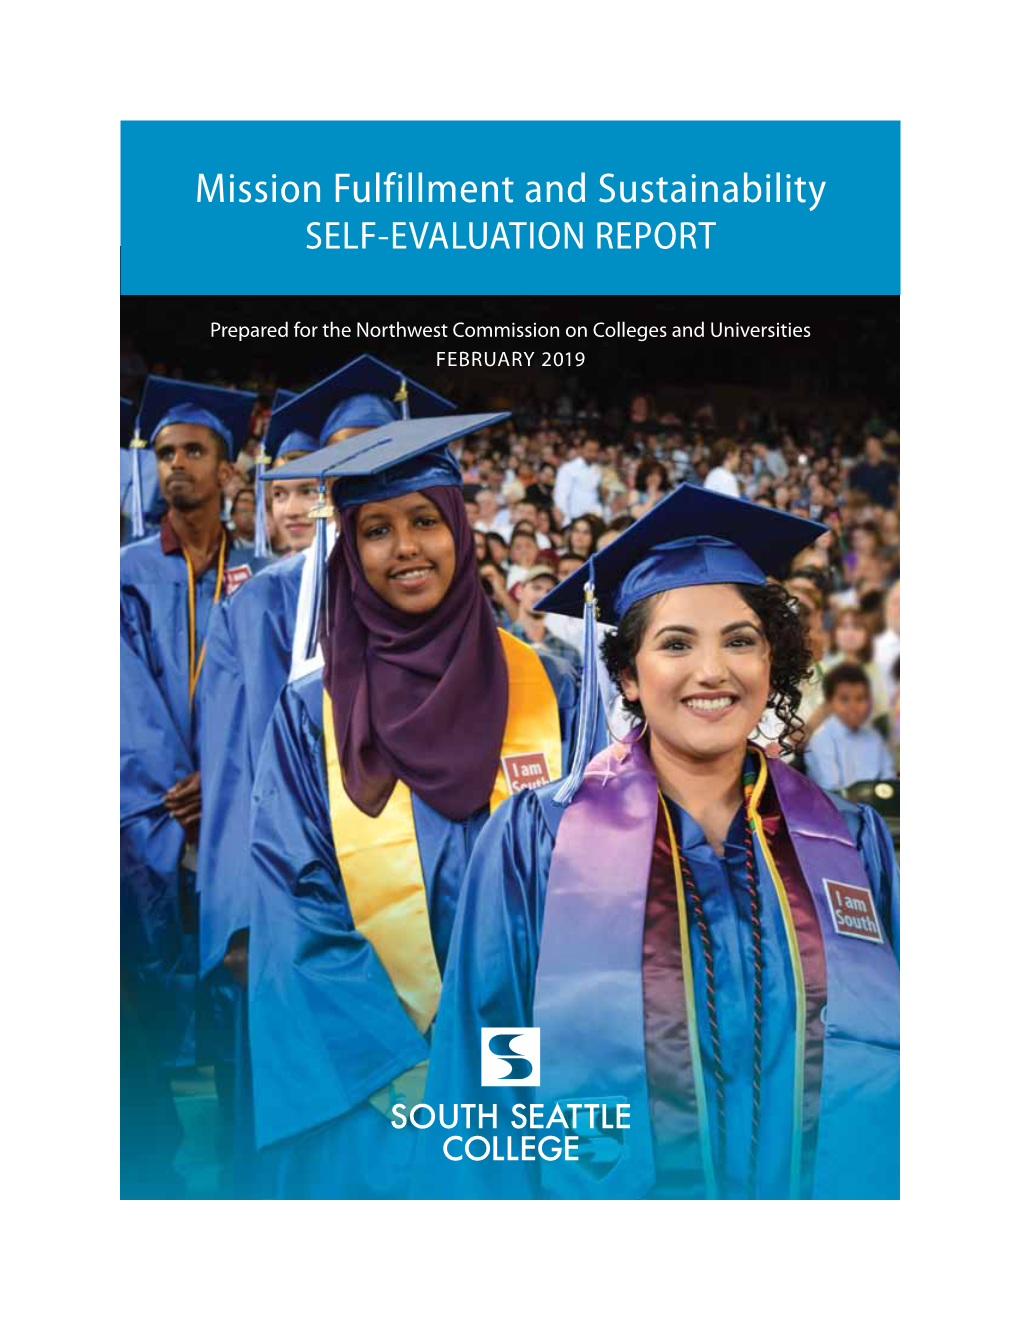 2019 Mission Fulfillment and Sustainability Self-Evaluation Report